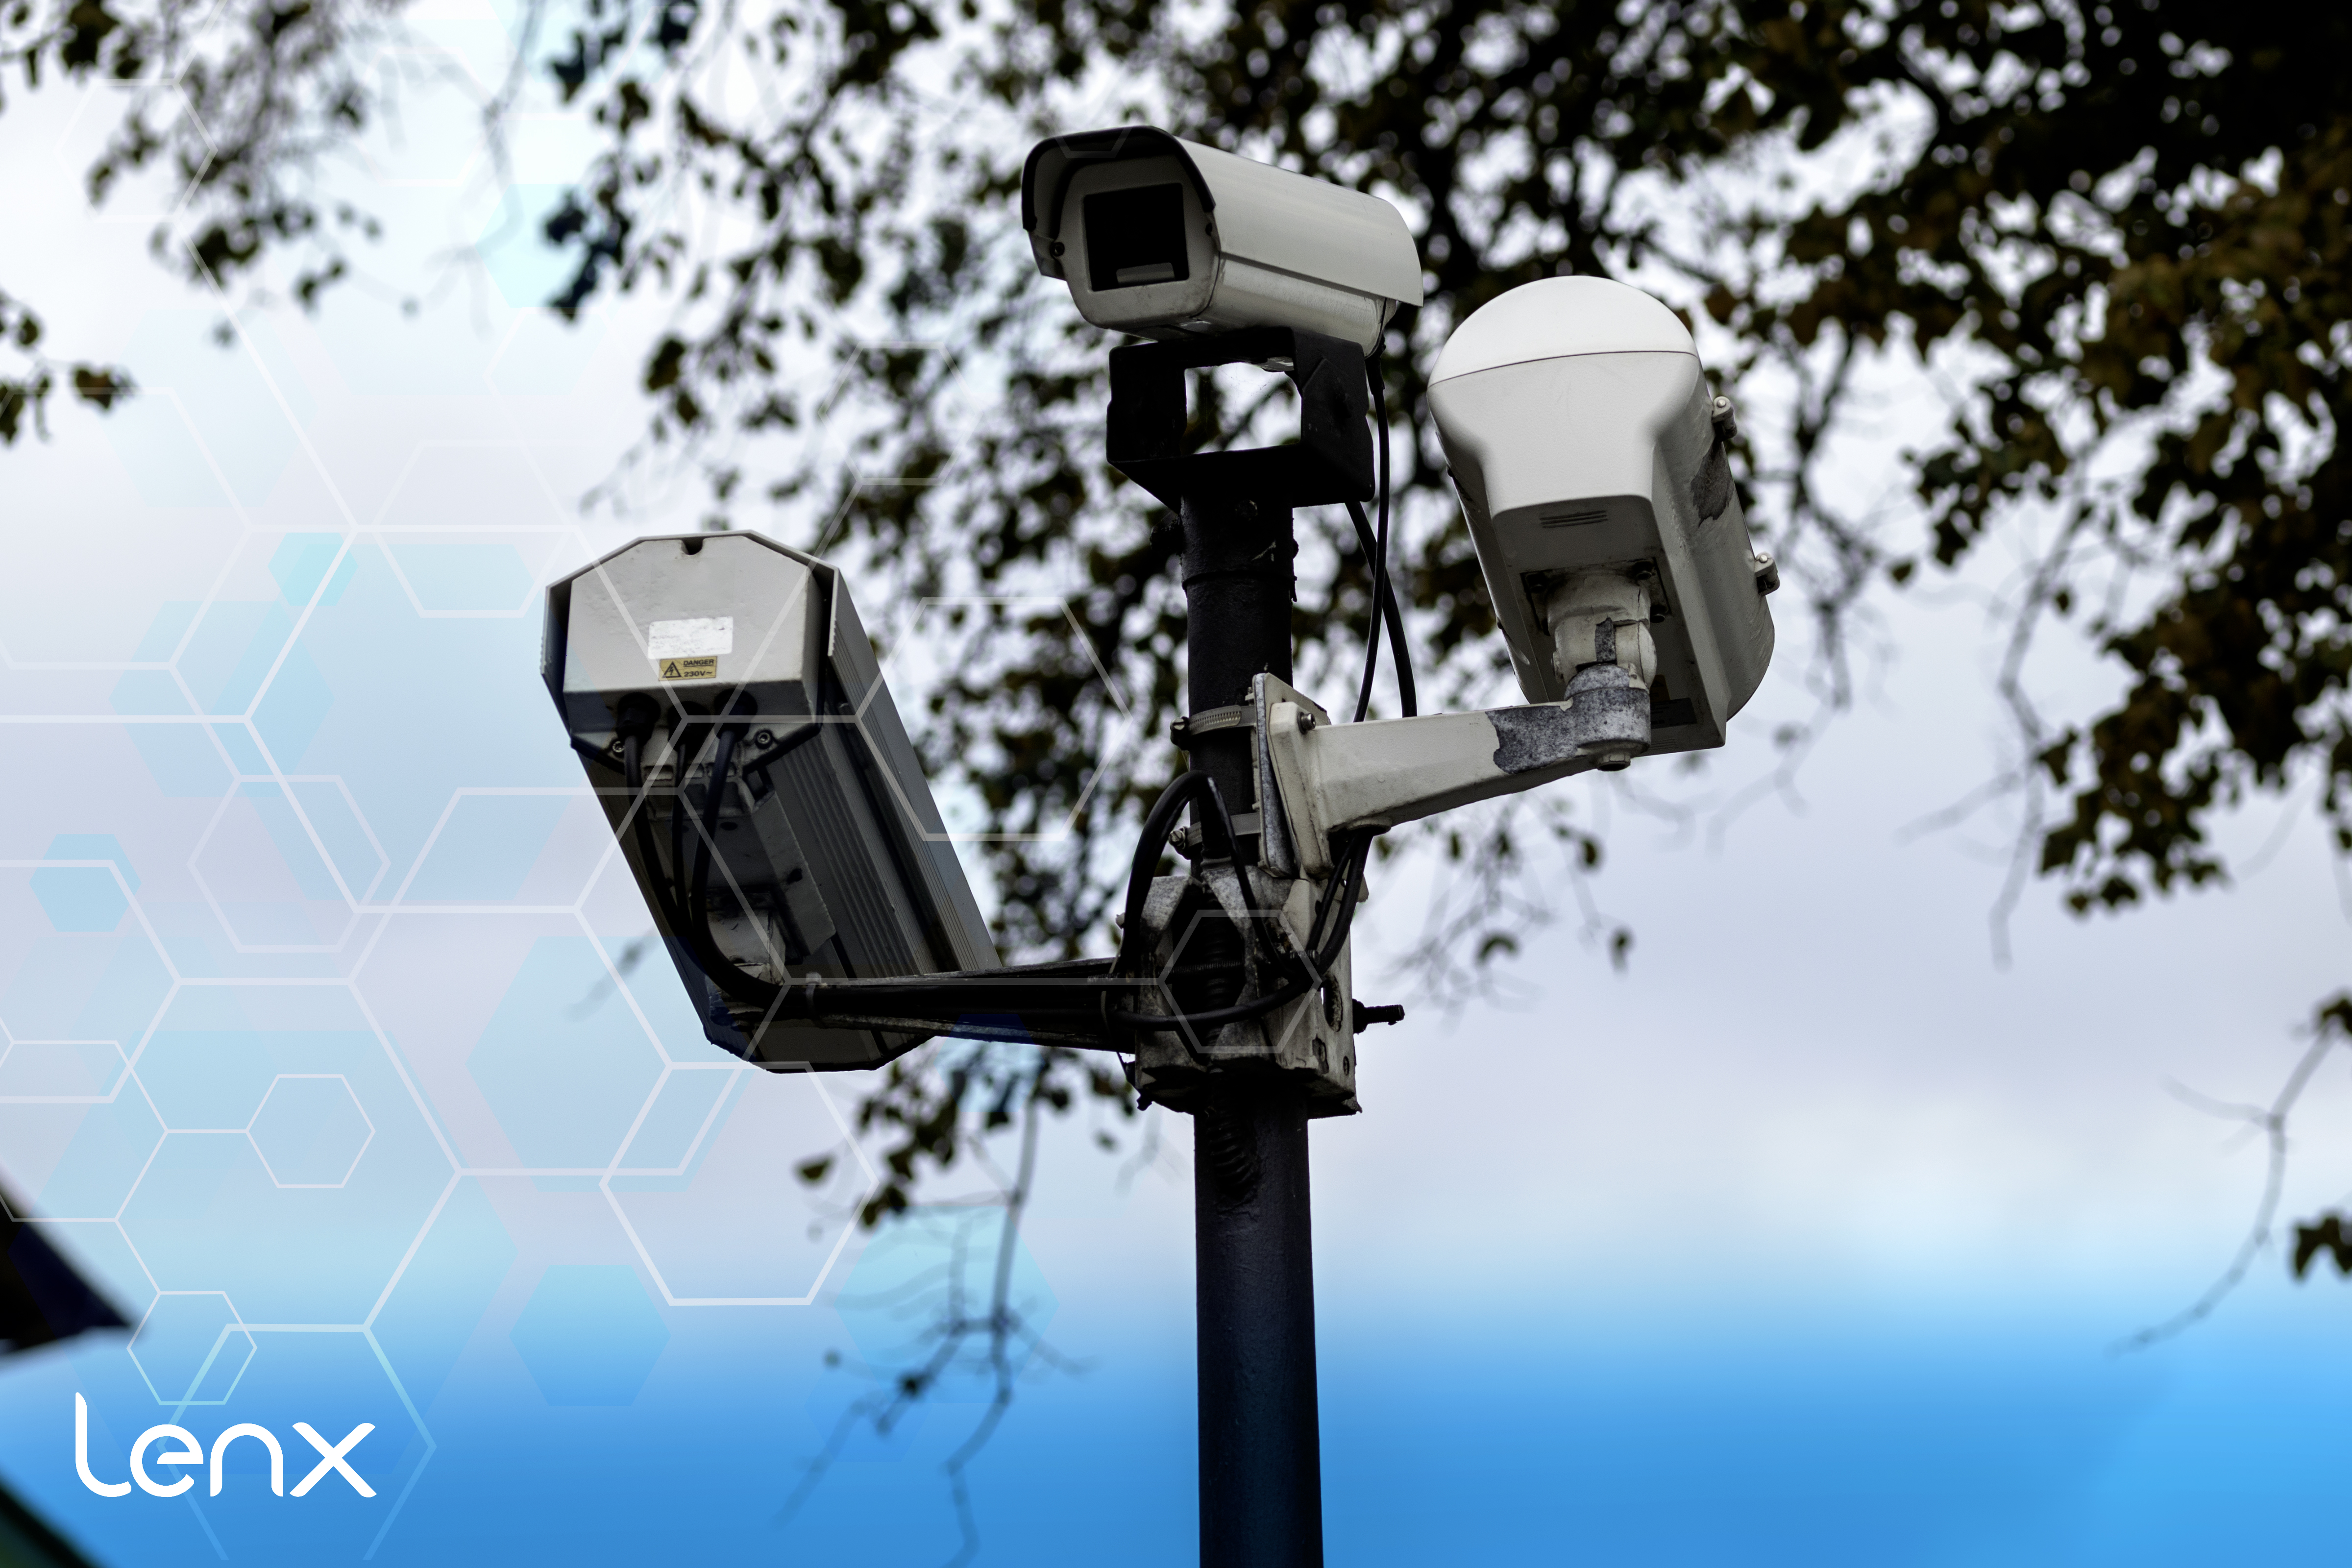 Turning Security Cameras Into Proactive Tools Using AI Security, Gun Detection